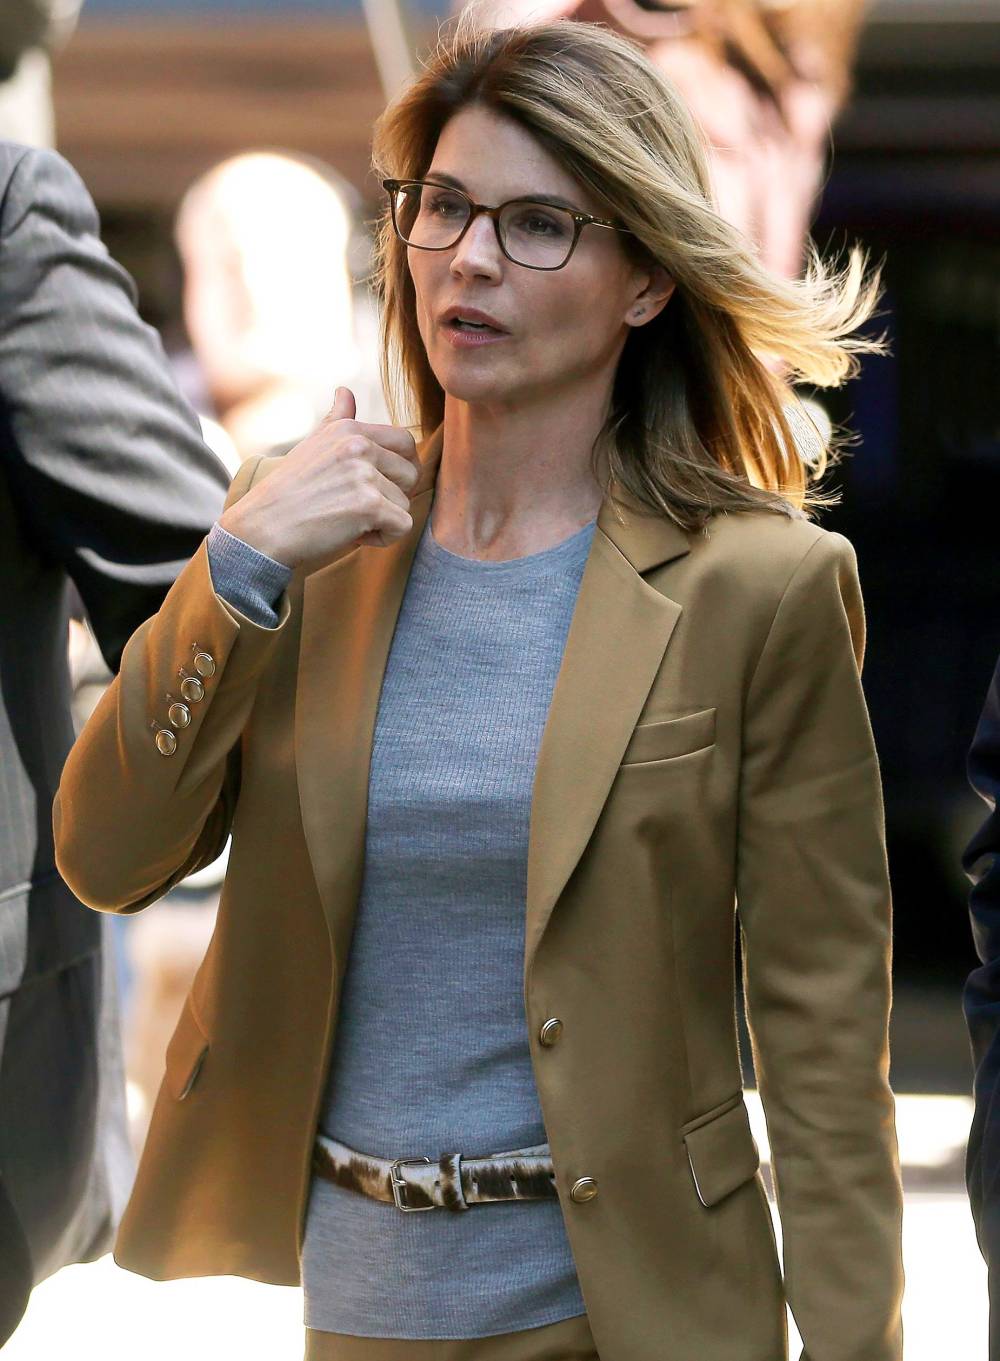 Lori Loughlin Requests Return of Her Passport After Completing Prison Sentence for College Scandal